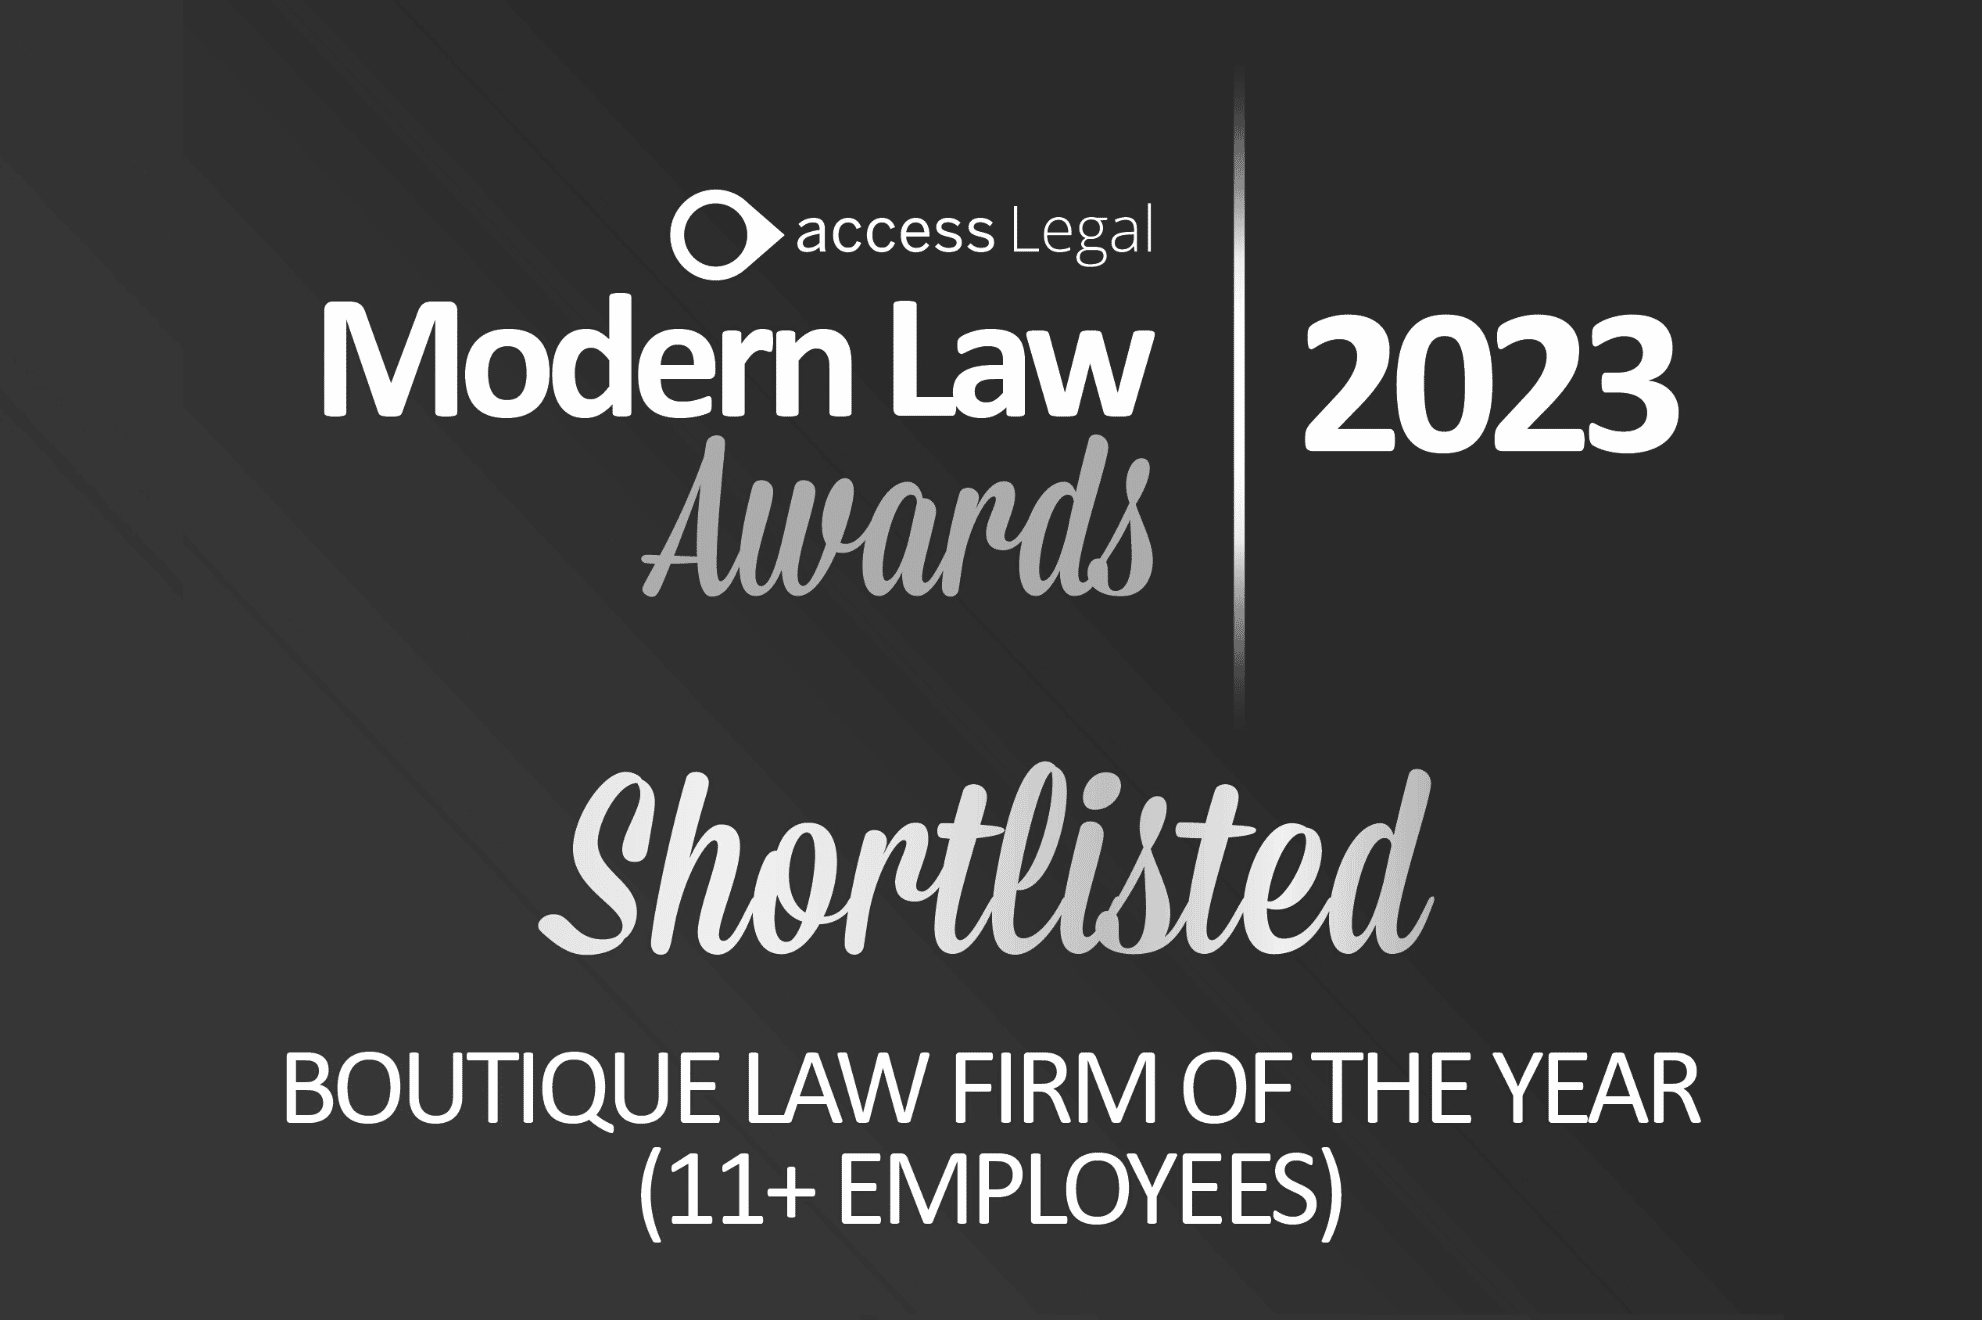 HLaw up for ‘Boutique Law Firm of the Year (11+ Employees)’ award at the Modern Law Awards